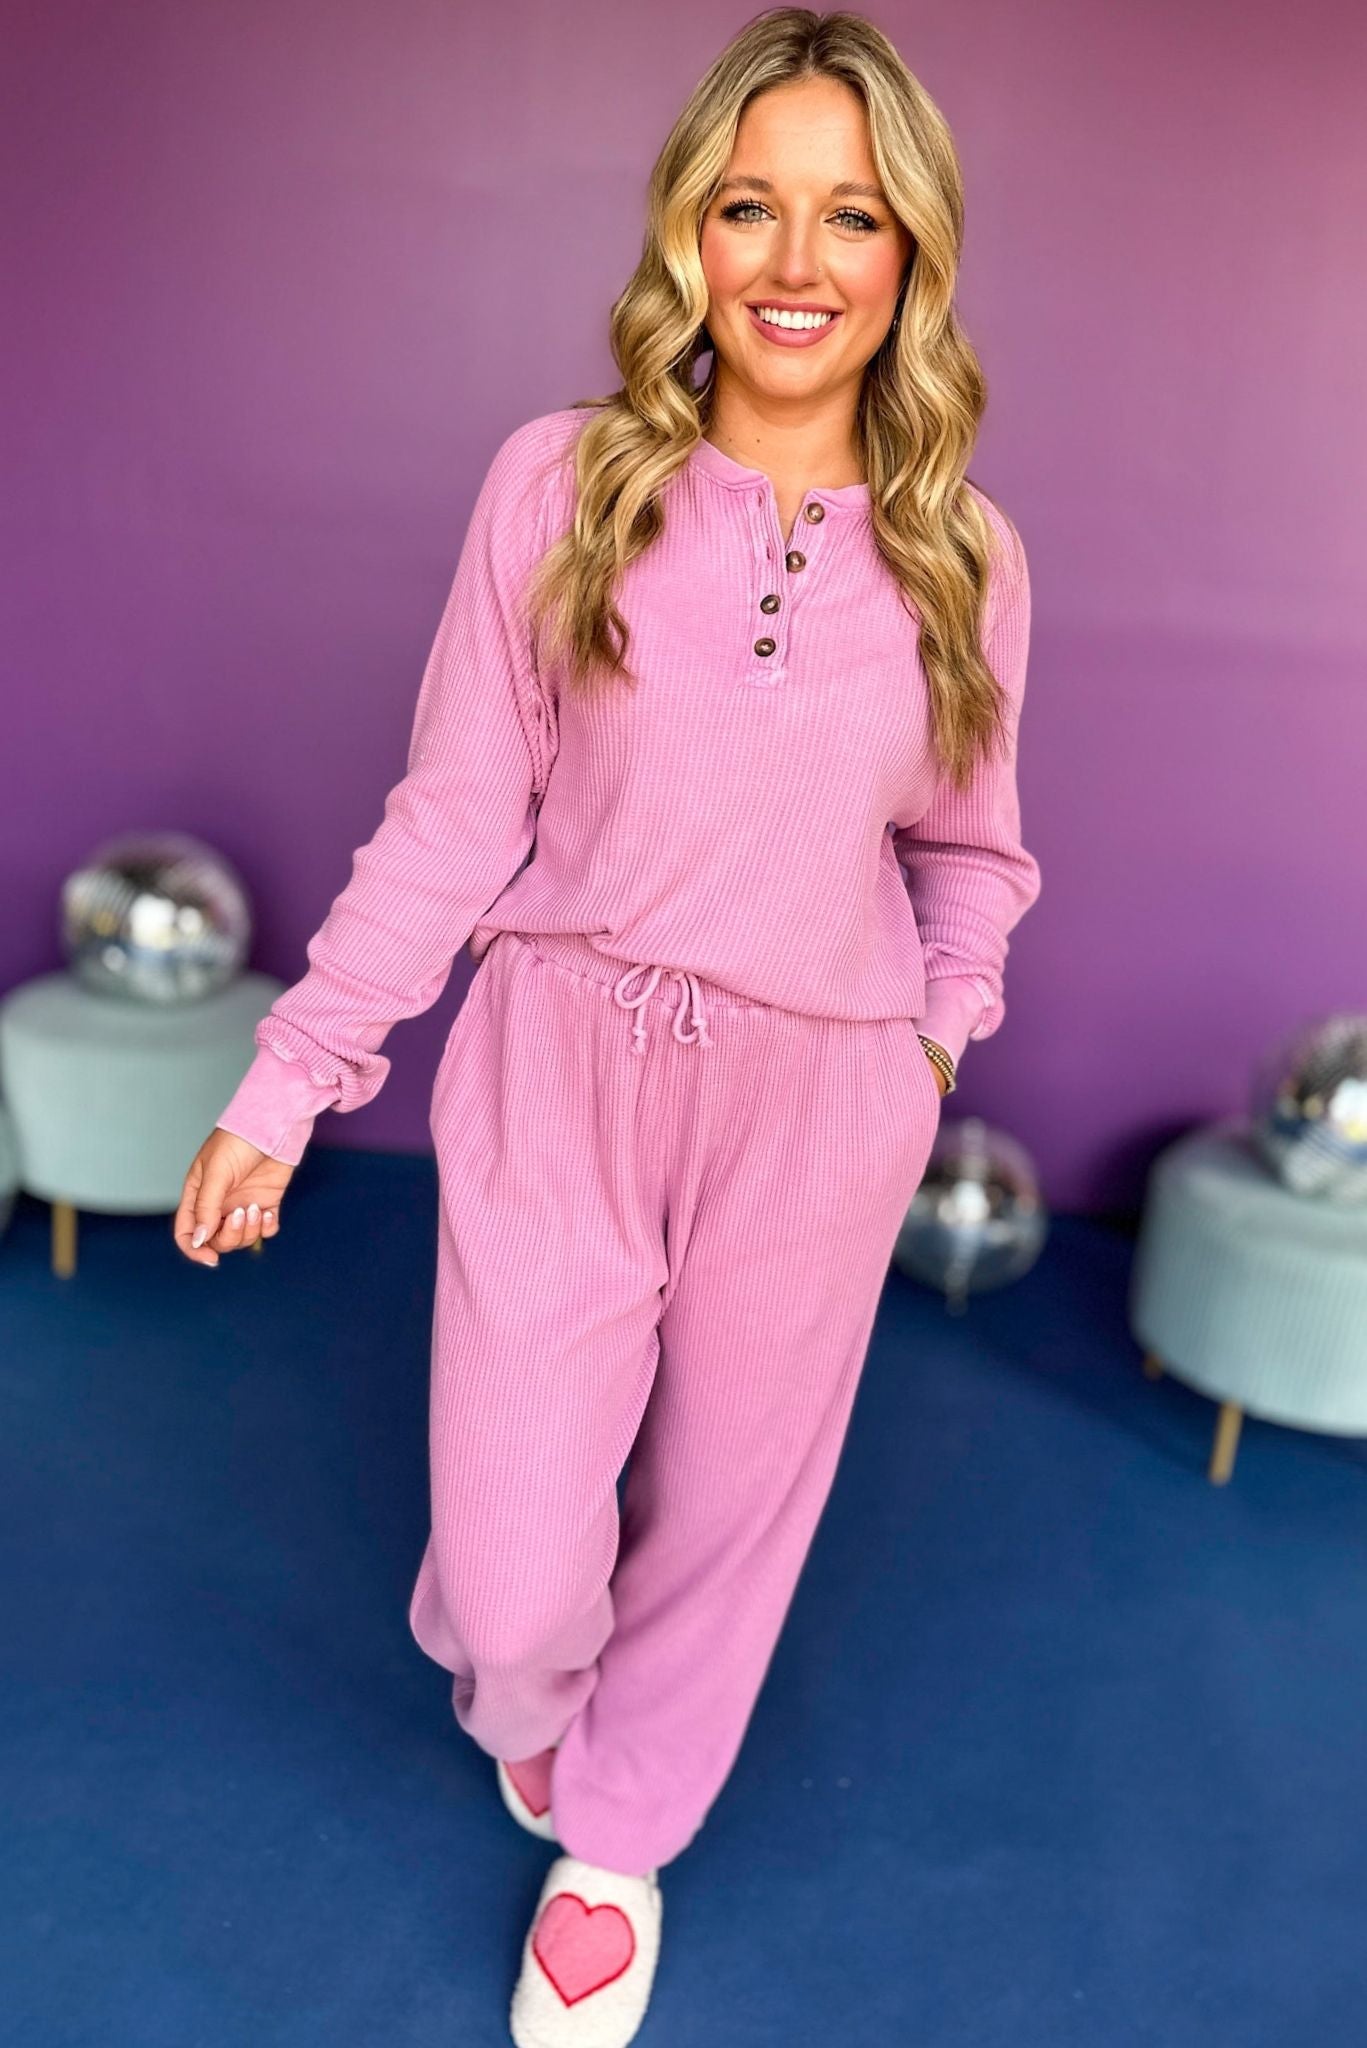 Purple Elastic Waistband Ribbed Pants, must have pants, must have style, must have comfortable style, fall fashion, fall style, street style, mom style, elevated comfortable, elevated loungewear, elevated style, shop style your senses by mallory fitzsimmons